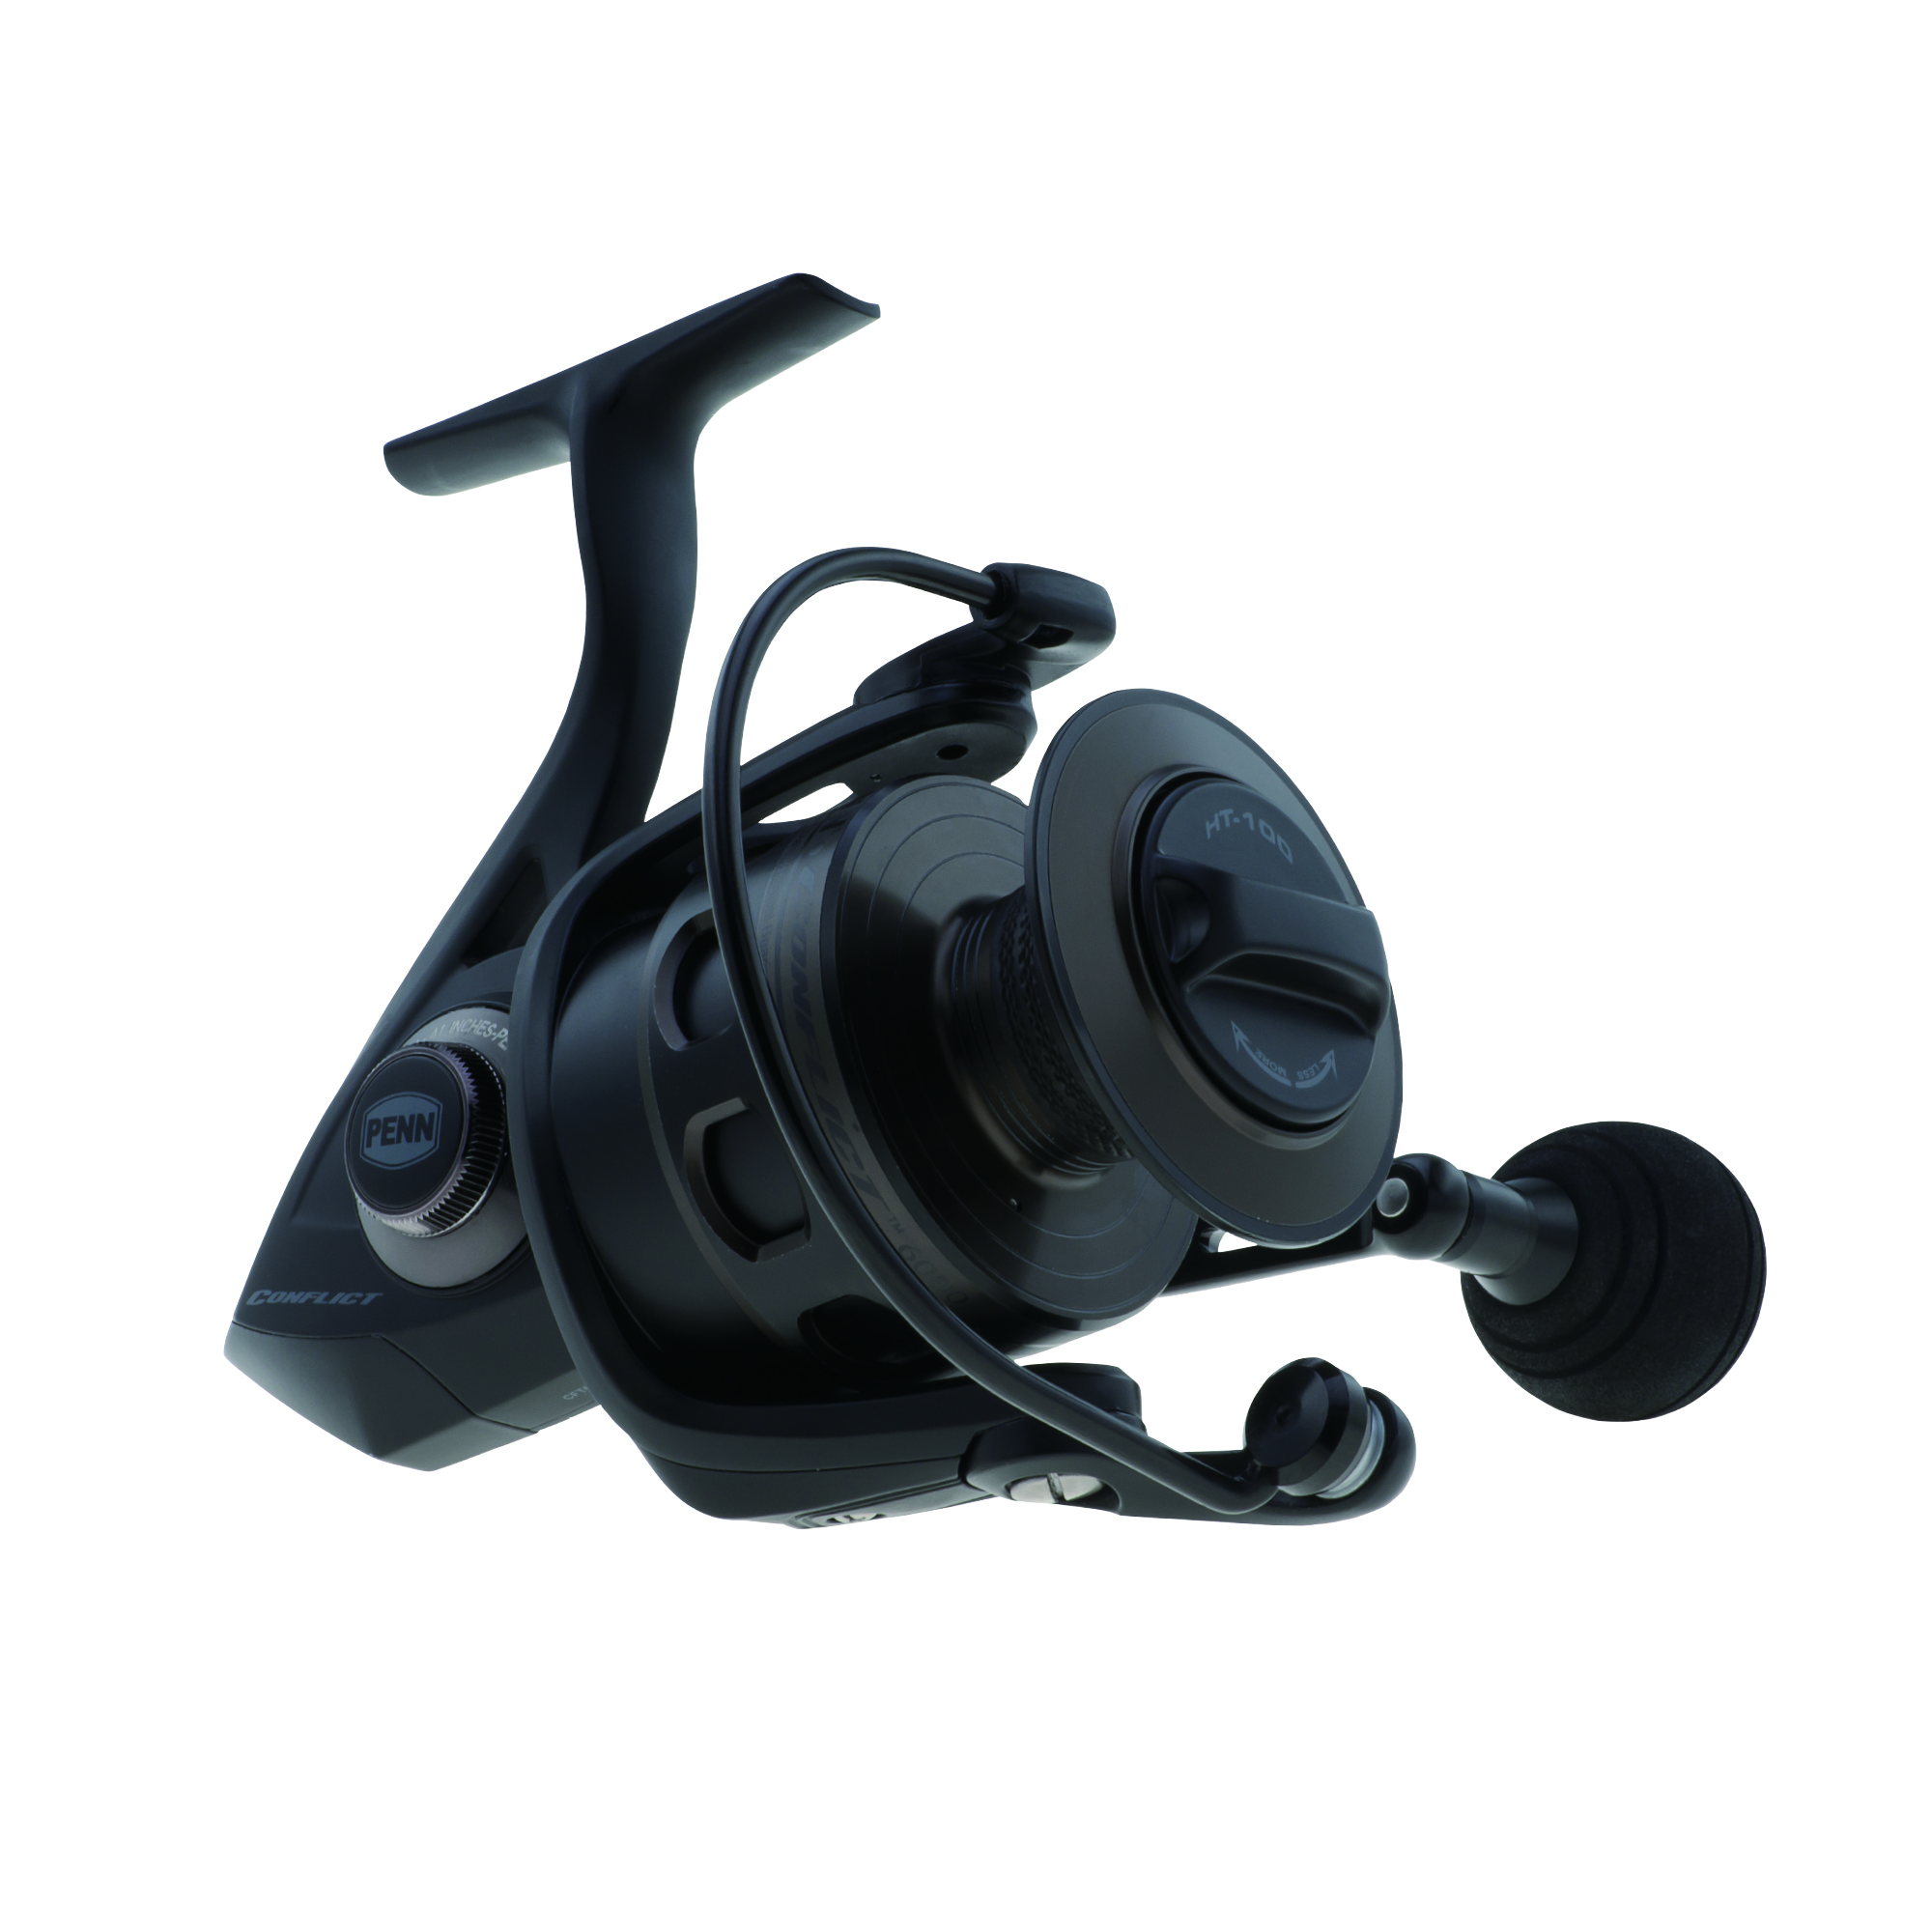 Penn Conflict CFT Spinning Reel